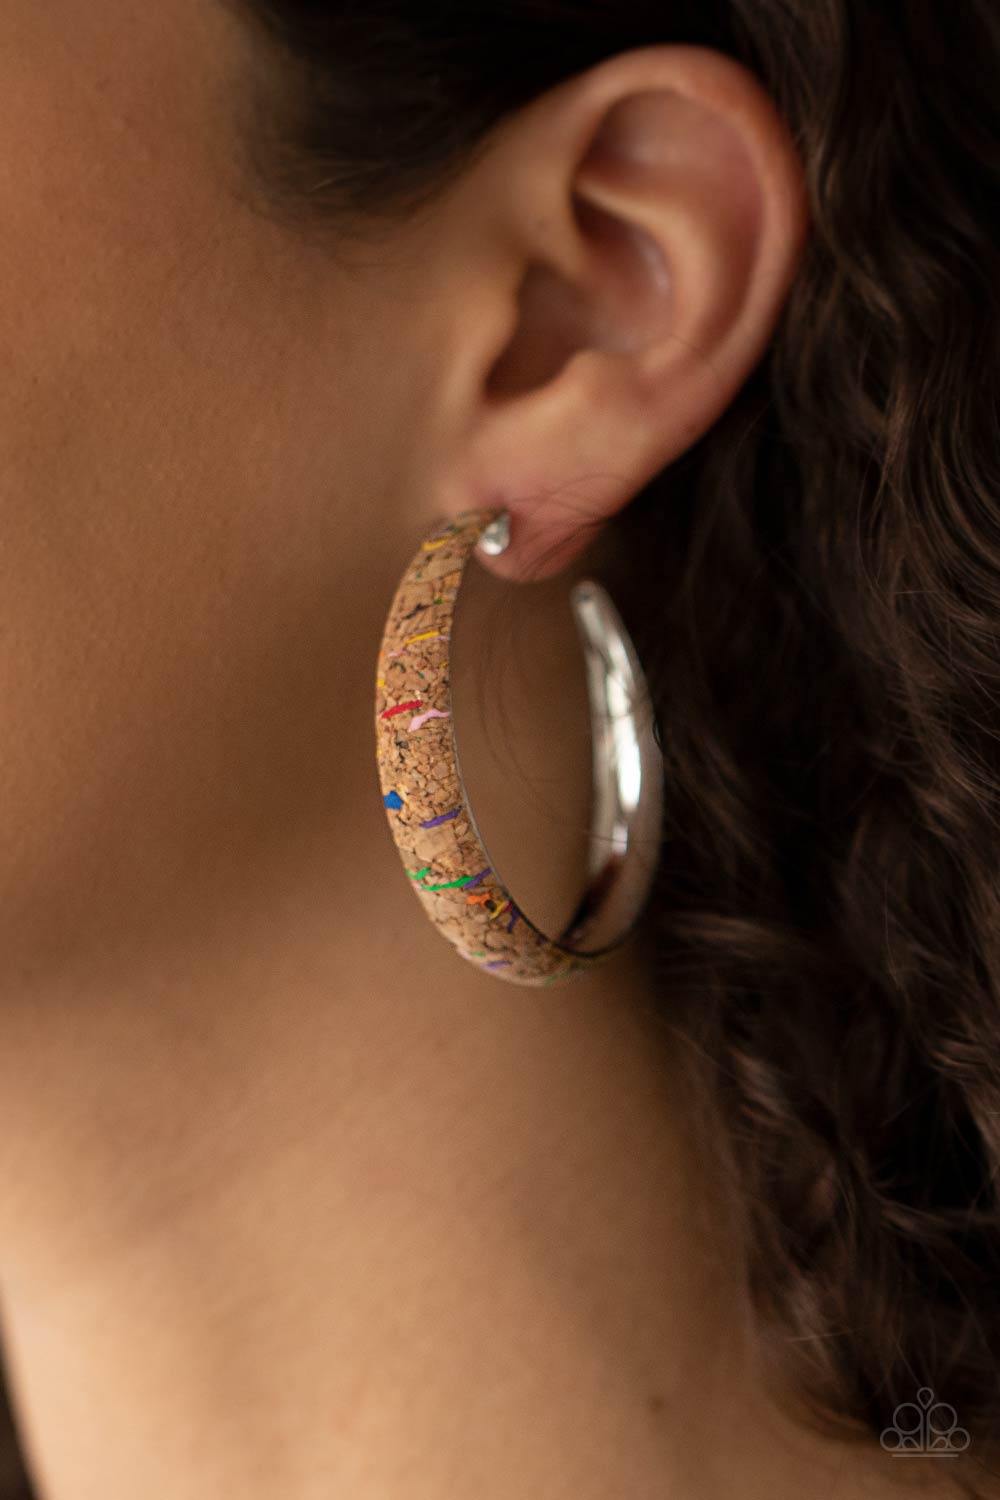 A Cork in the Road - Multi Hoop Earrings a cork lined silver hoop is splattered in multicolored paint, creating a colorful display. Hoop measures approximately 2" in diameter. Earring attaches to a standard post fitting.  Sold as one pair of hoop earrings.